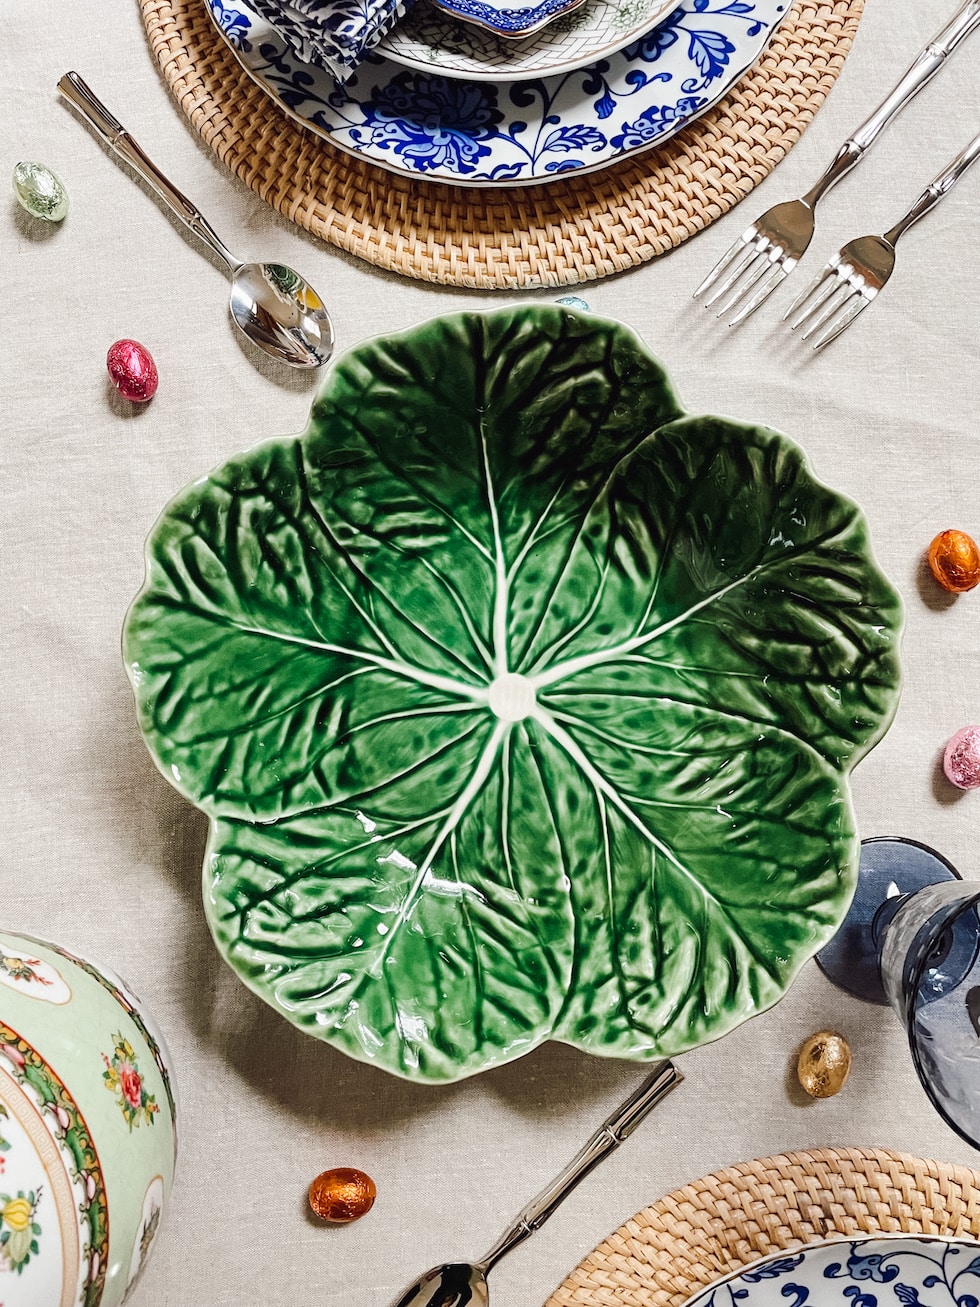 Our Pretty Spring Dishes and Easter Table Accessories + 6 Table Setting Tips!